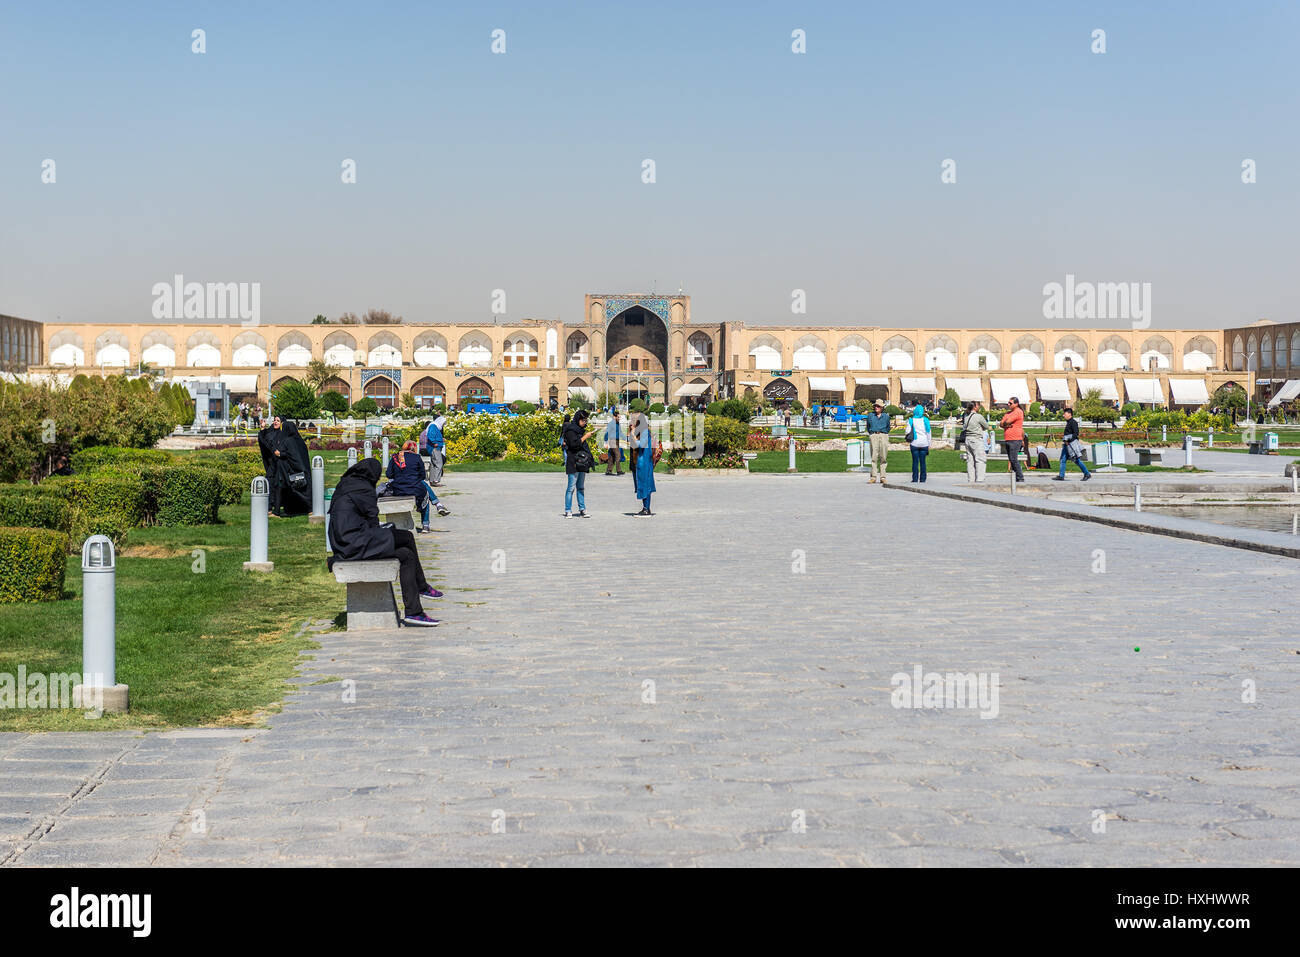 Naqsh-e Jahan Square (Imam Square, formlerly Shah Square) in centre of Isfahan, capital of Isfahan Province in Iran Stock Photo